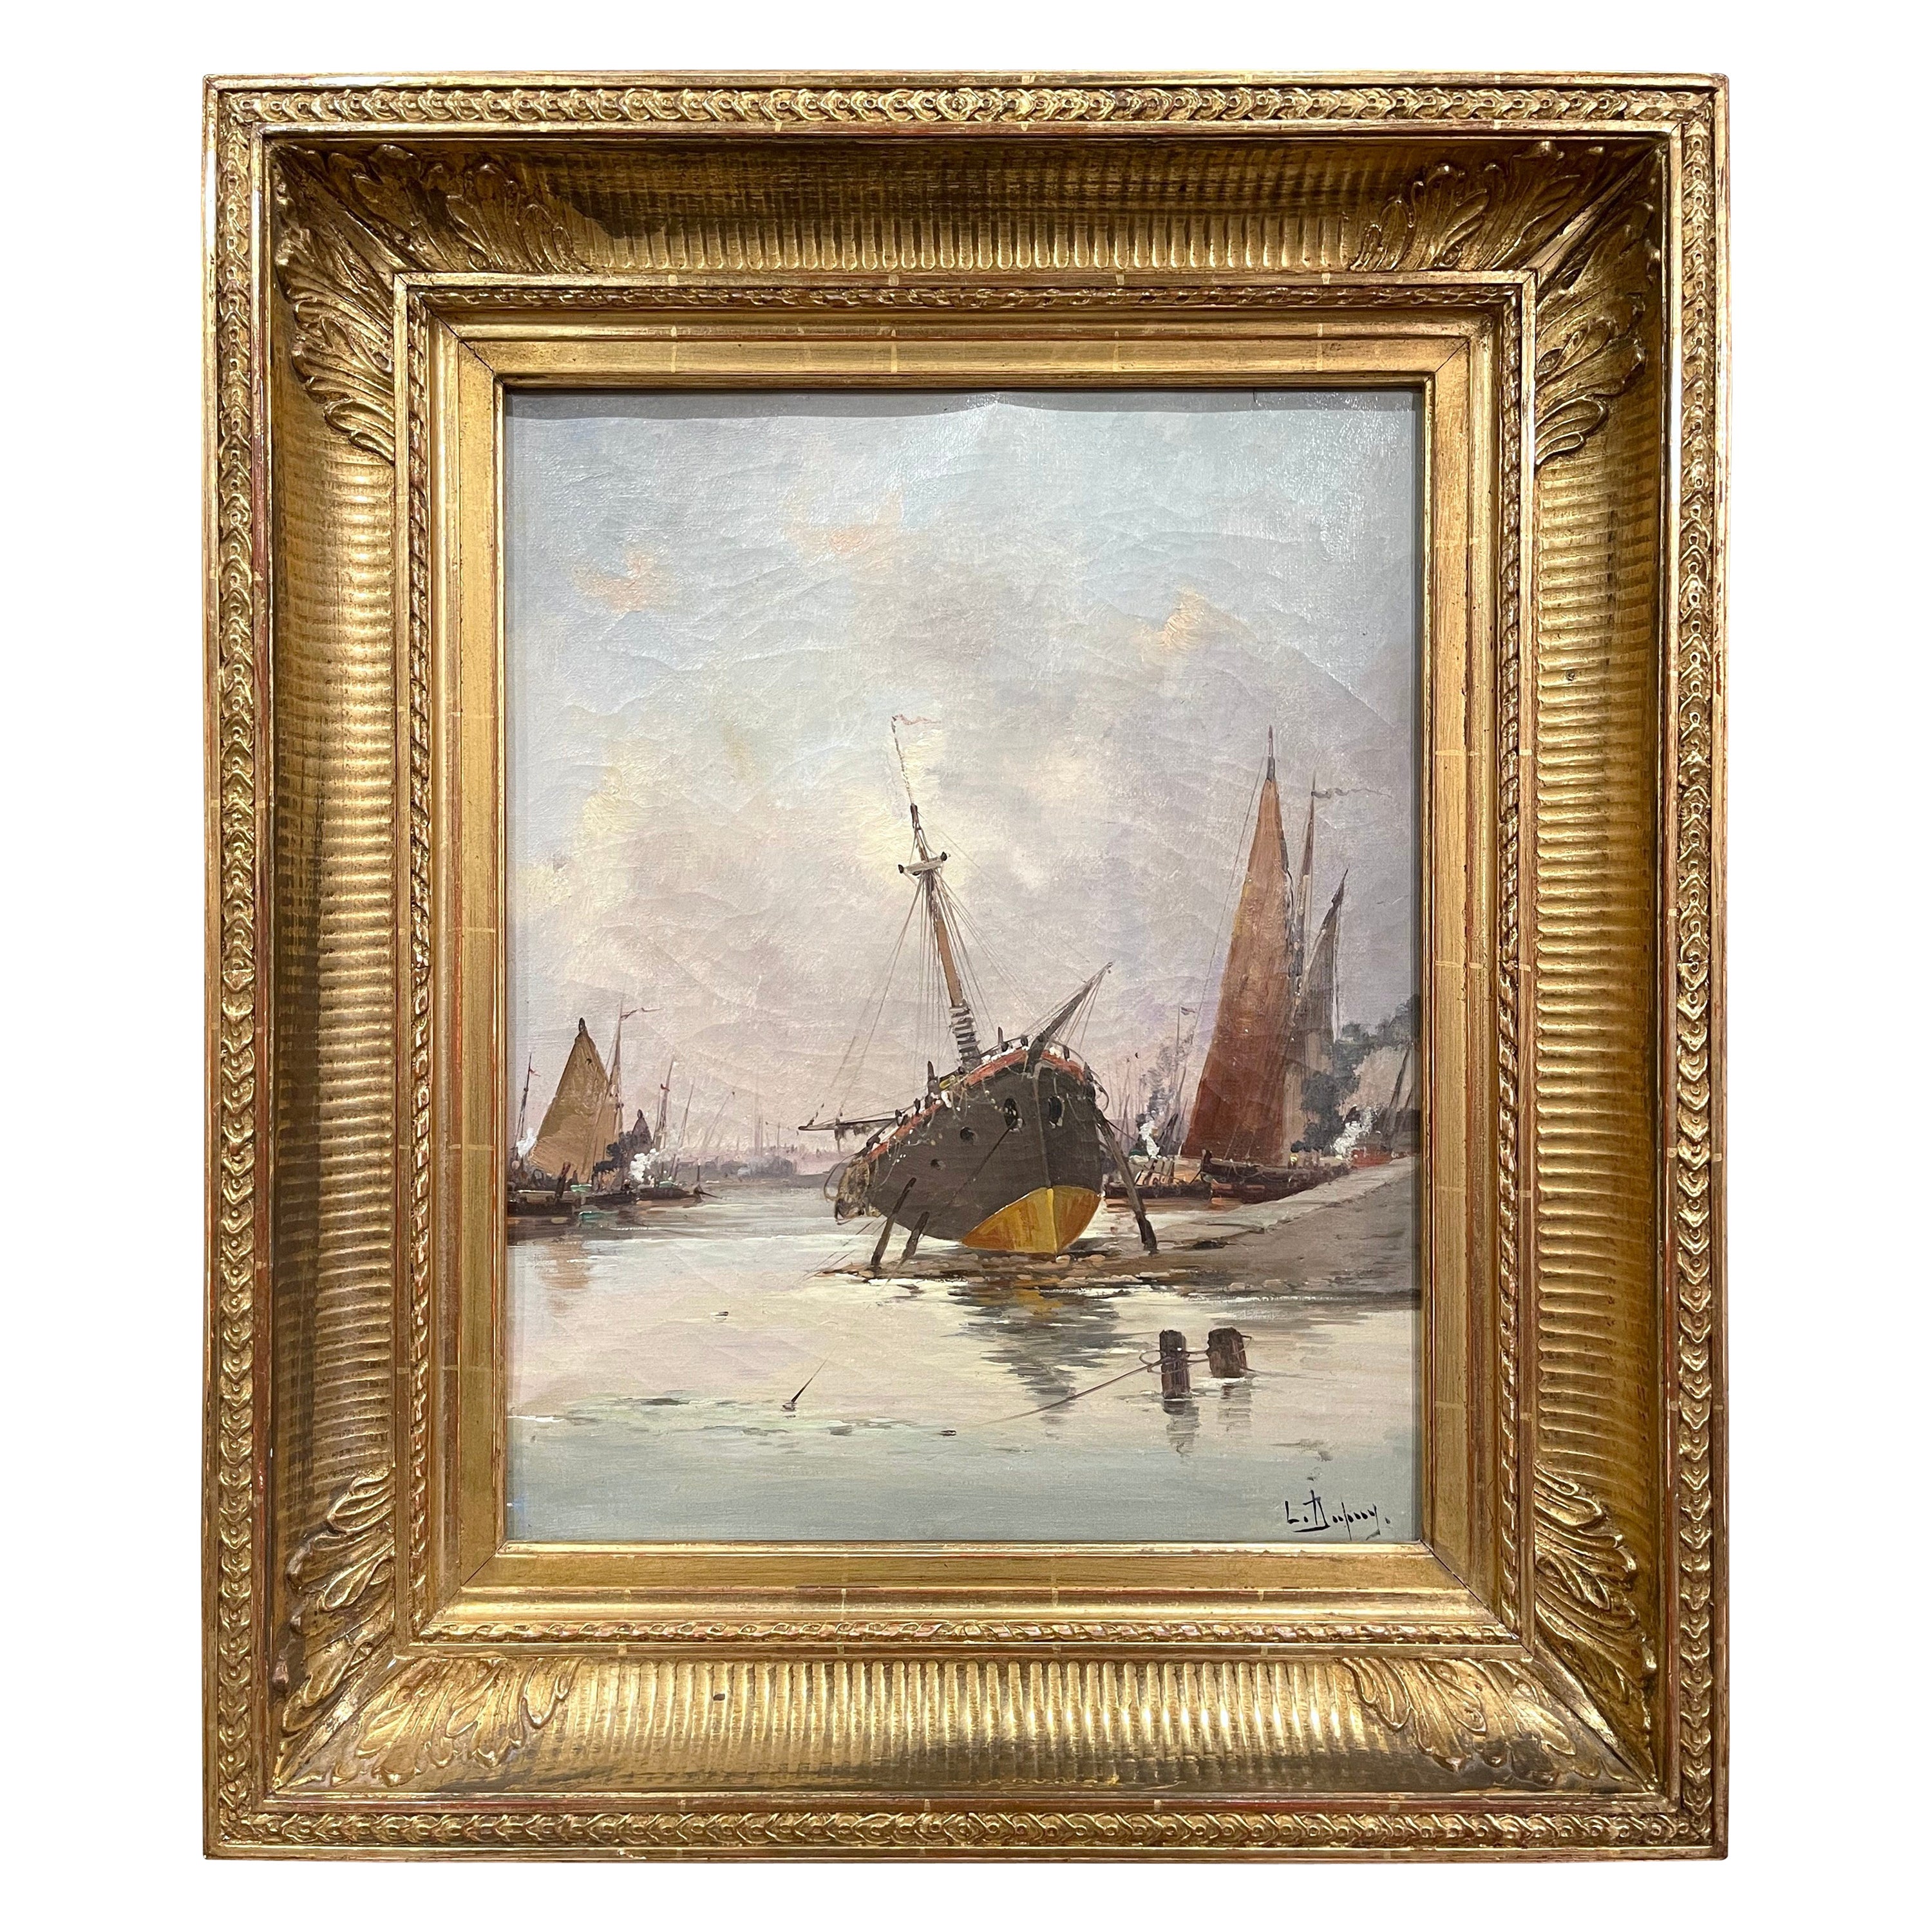 19th Century Oil on Canvas Ship Painting Signed E. Dupuy for E. Galien-Laloue